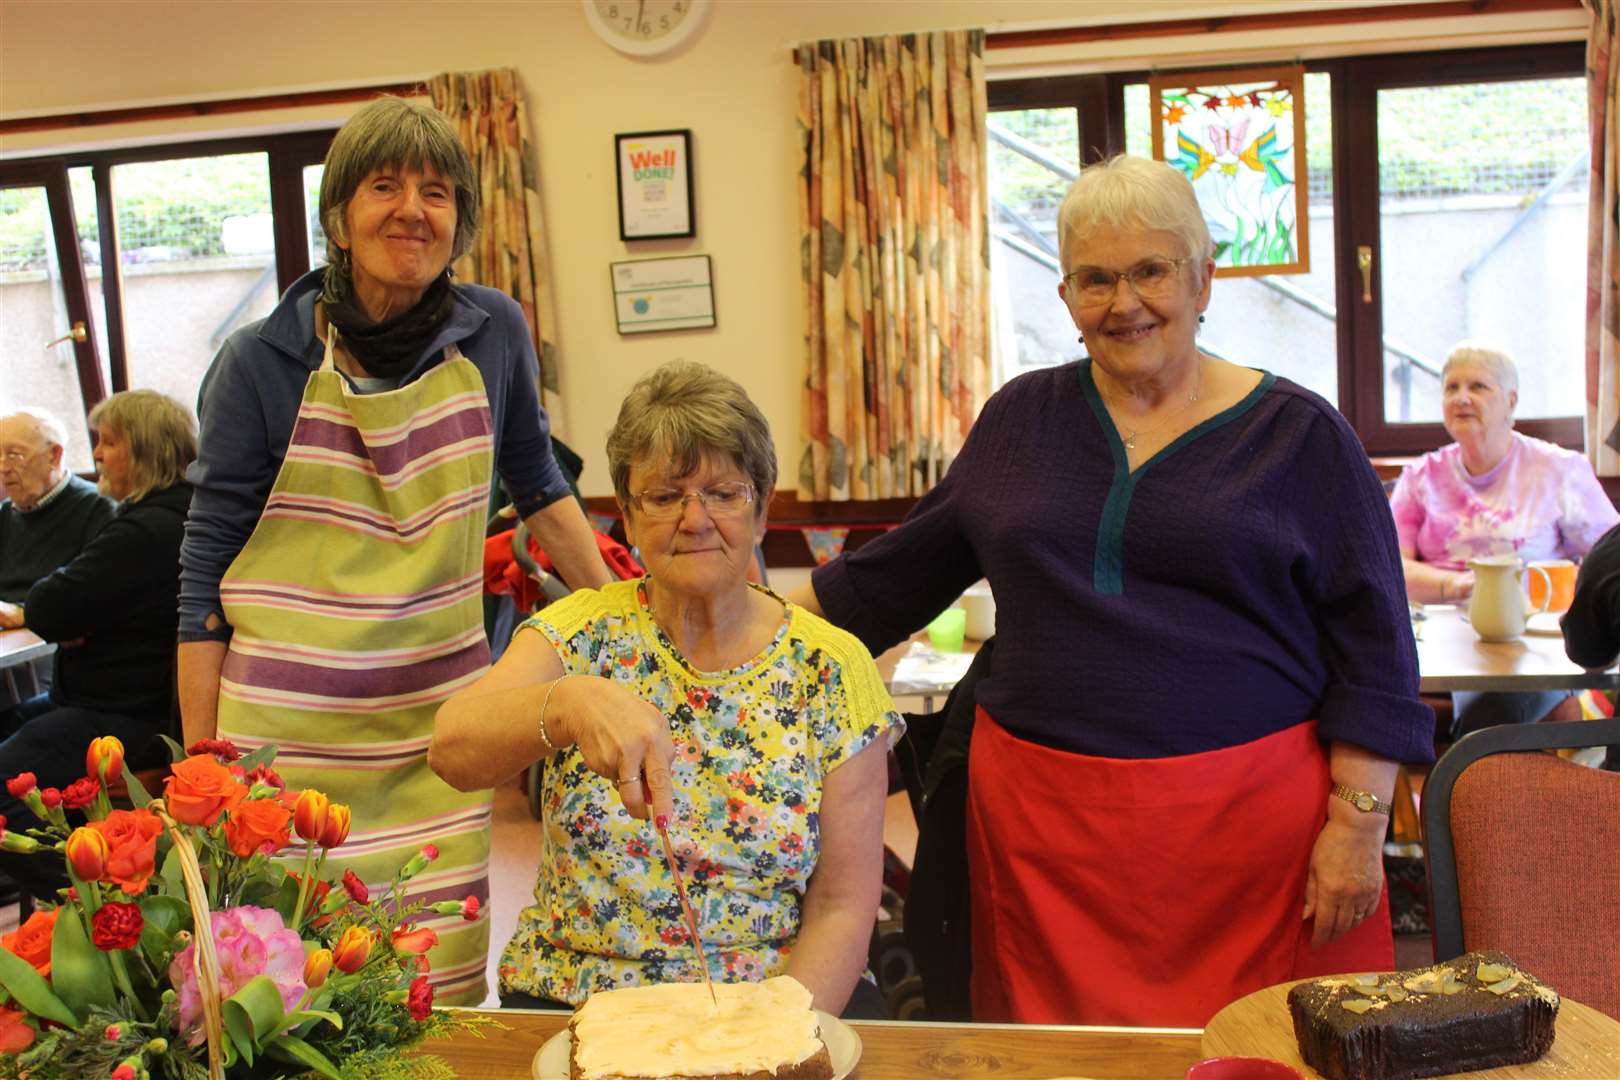 12th birthday party celebrations in Kemnay village hall for the weekly community coffee morning and Bargain Box with Liz Mackay (left) Gladys Wardle and Vera Walker with the carrot cake minus its candles last Friday morning. Picture:Griselda McGregor